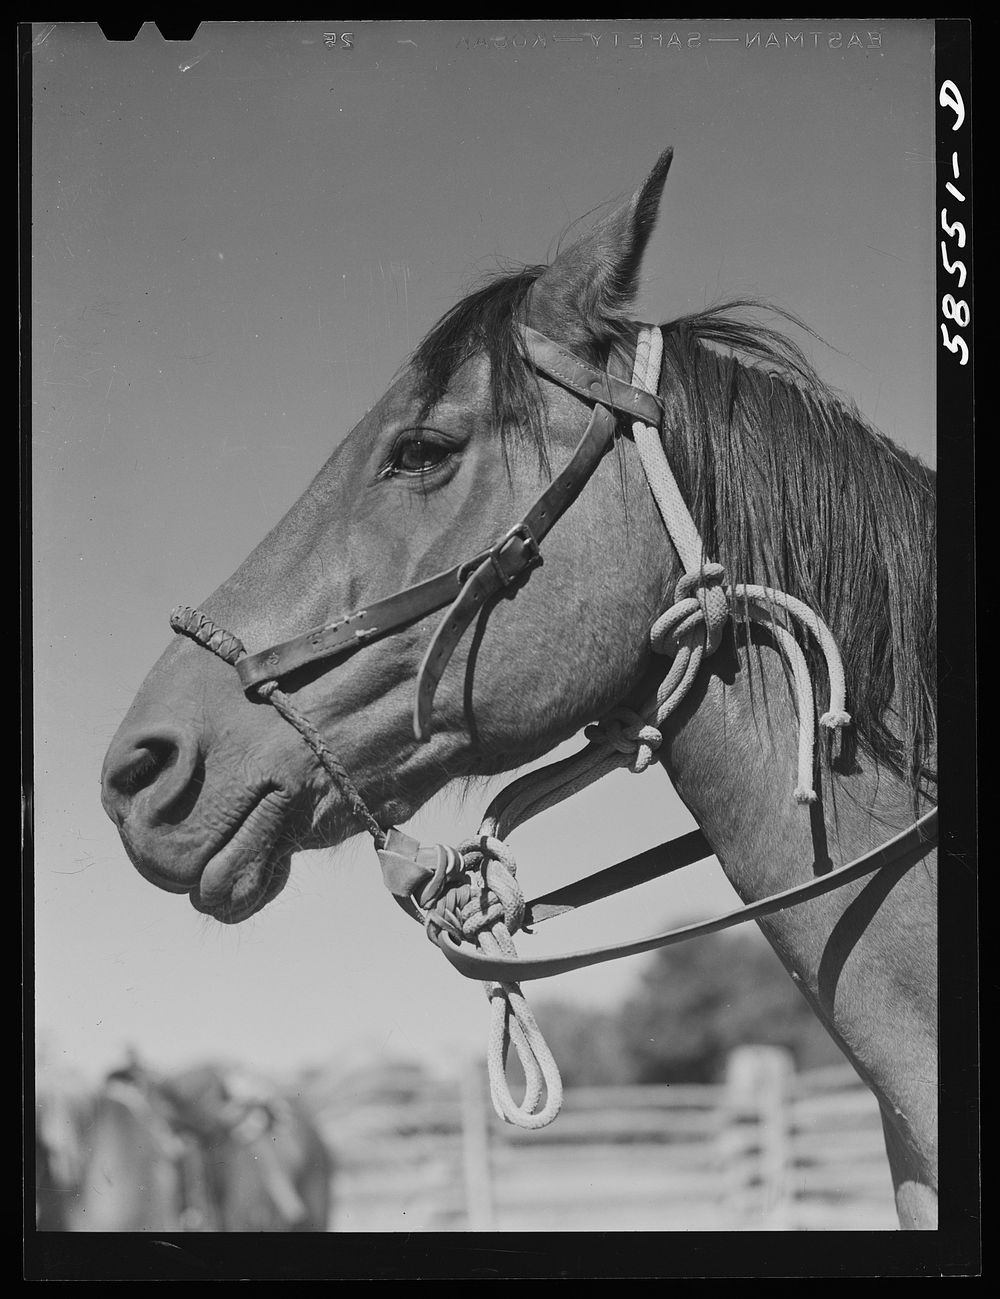 Horse in the corral. Quarter Circle U, Brewster-Arnold Ranch Company. Briney, Montana. Sourced from the Library of Congress.